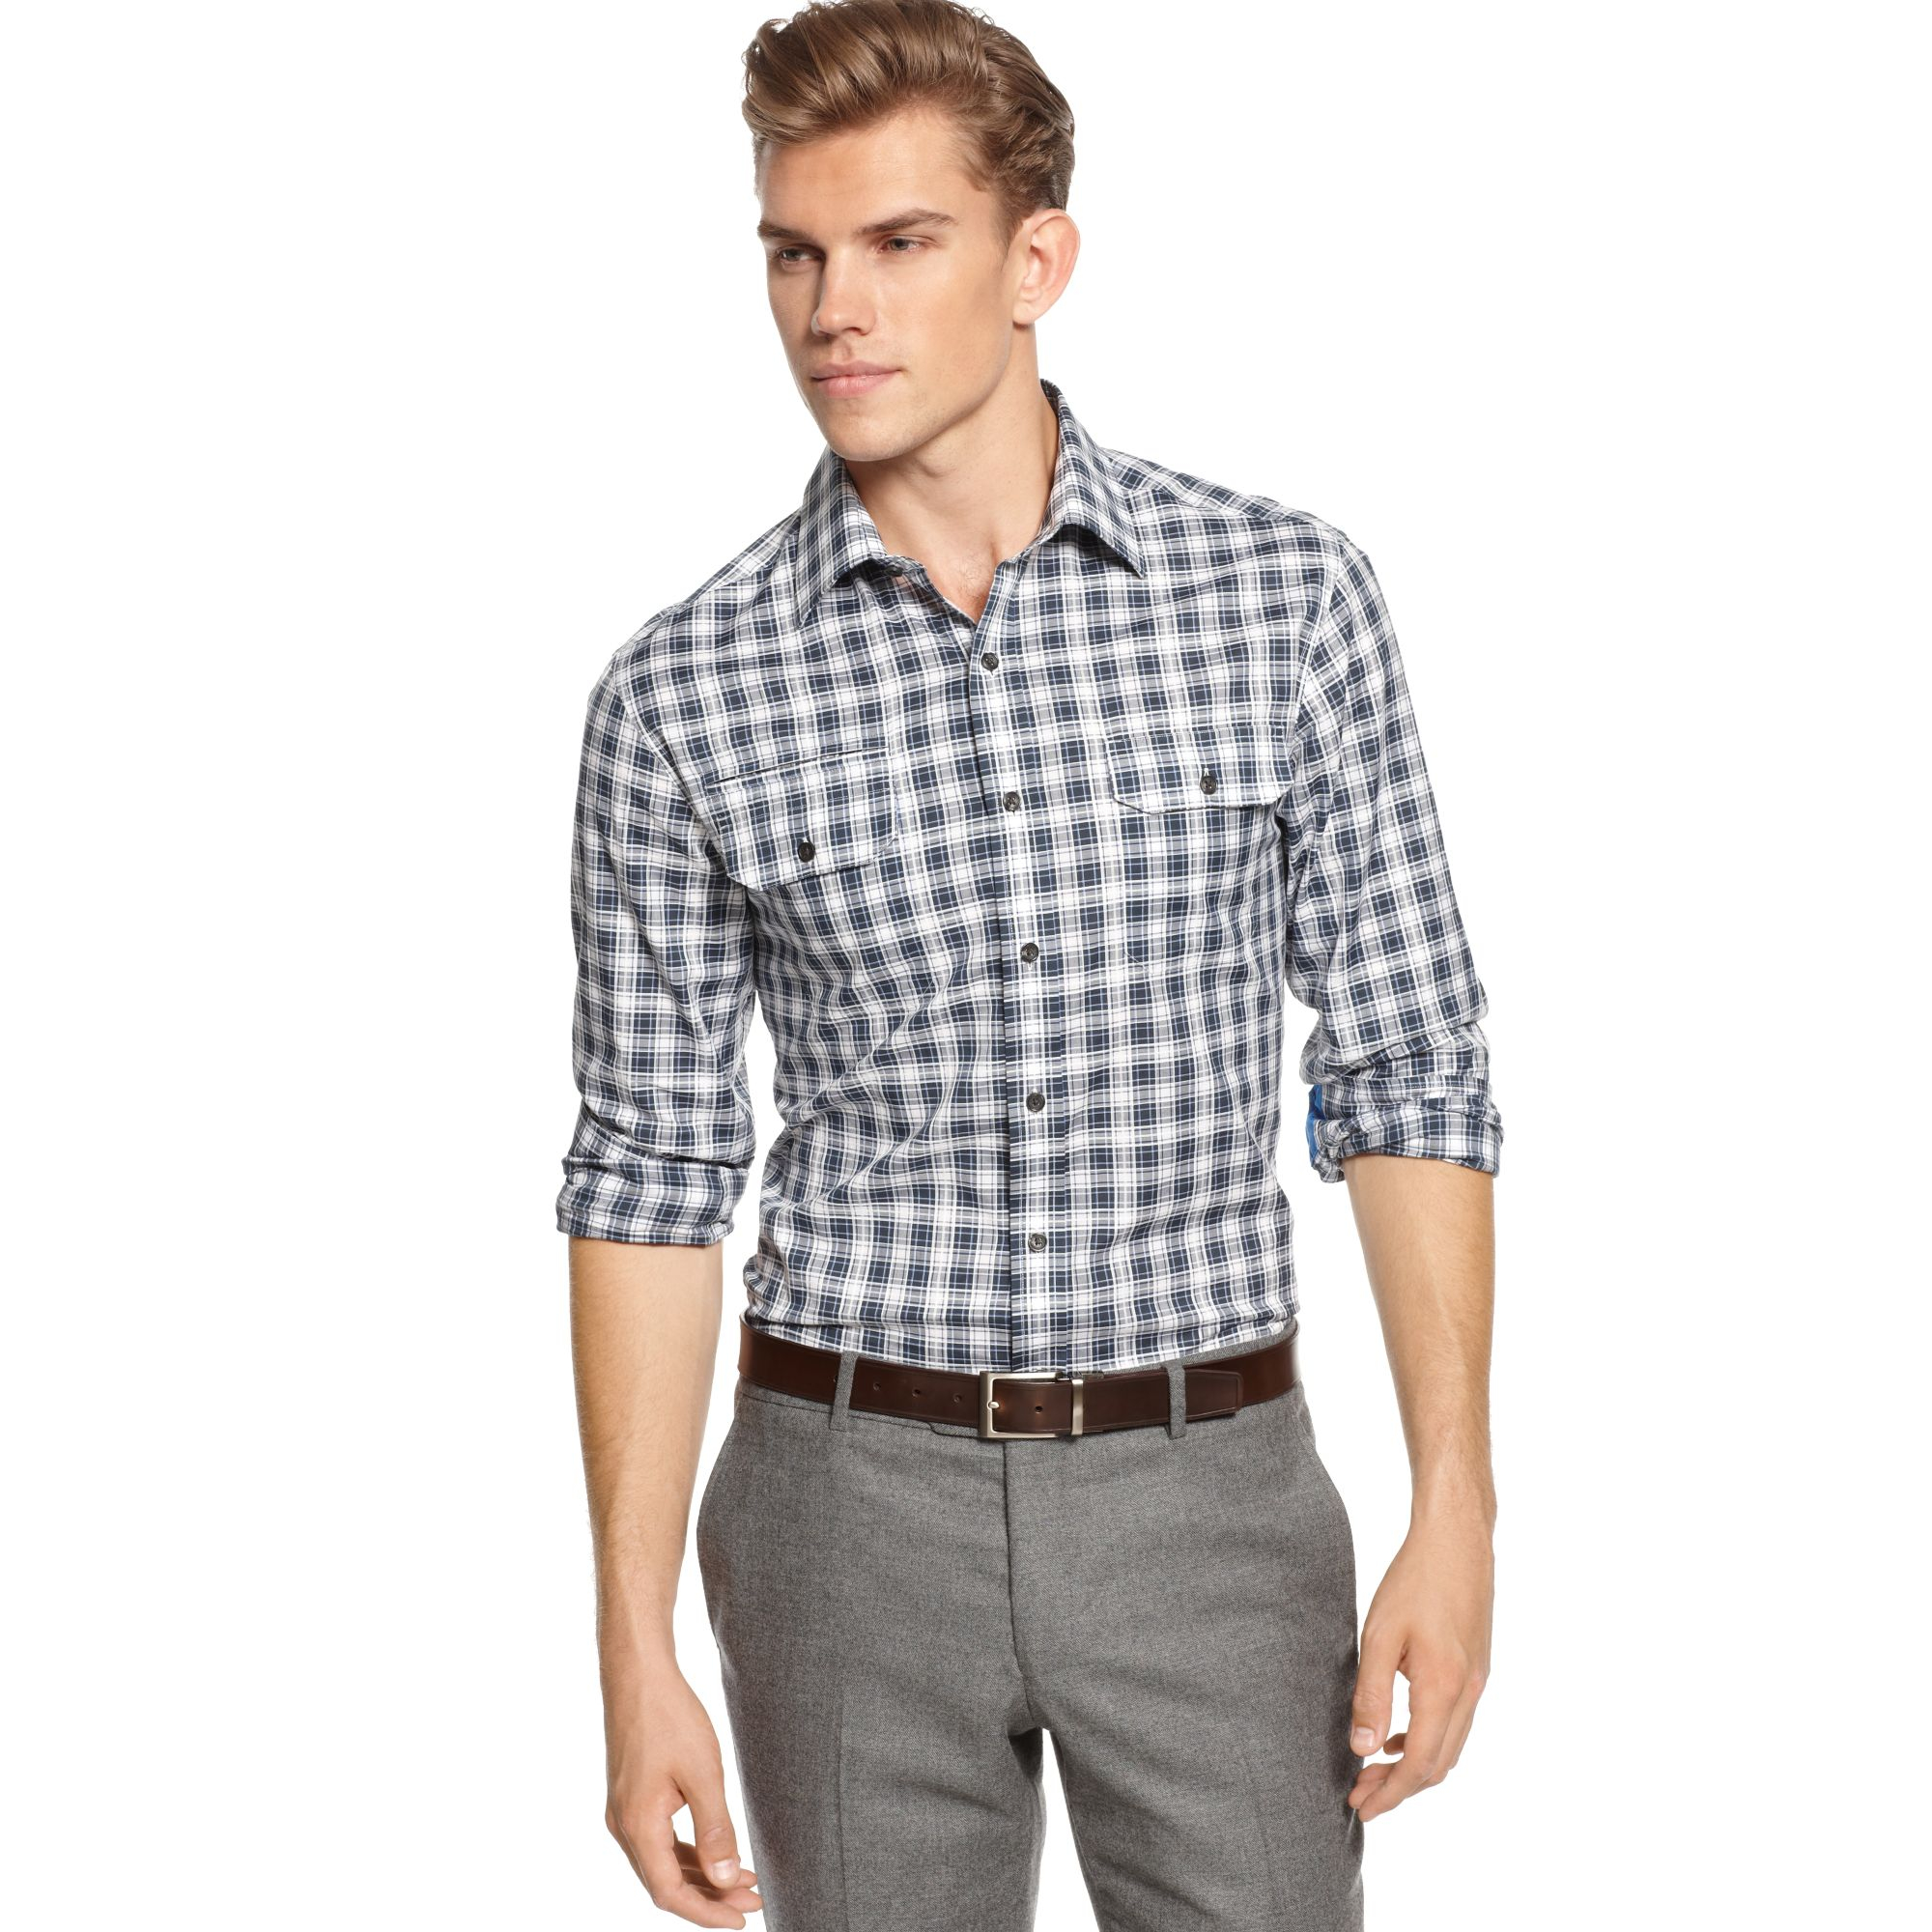 Lyst - Vince Camuto Longsleeve Plaid Dress Shirt in Blue for Men